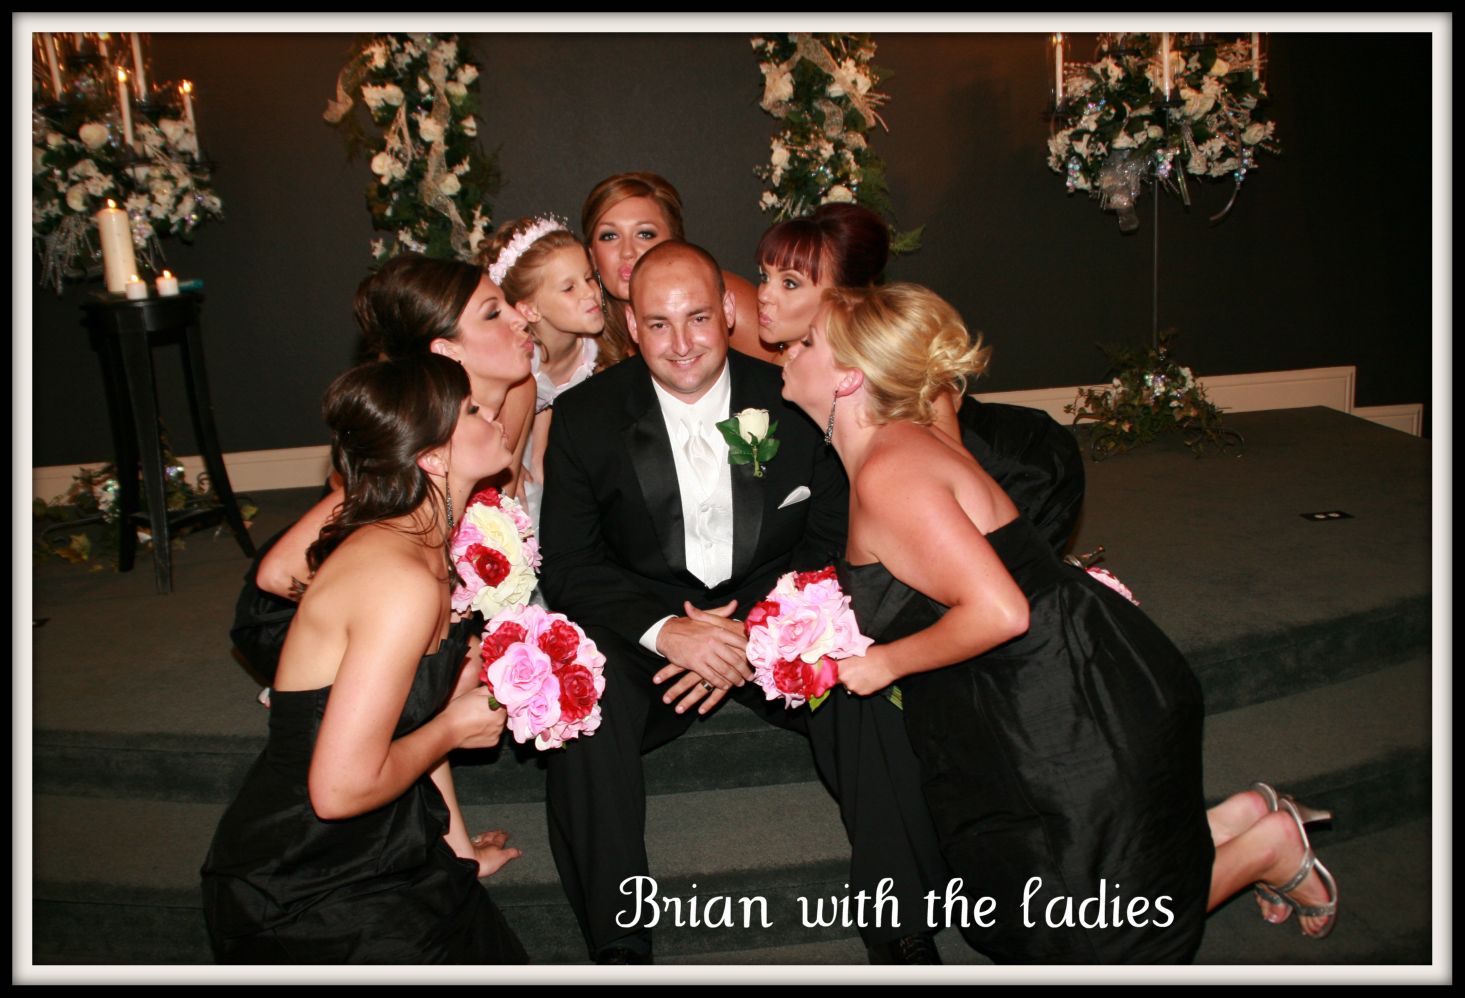 [Brian+with+the+ladies.jpg]